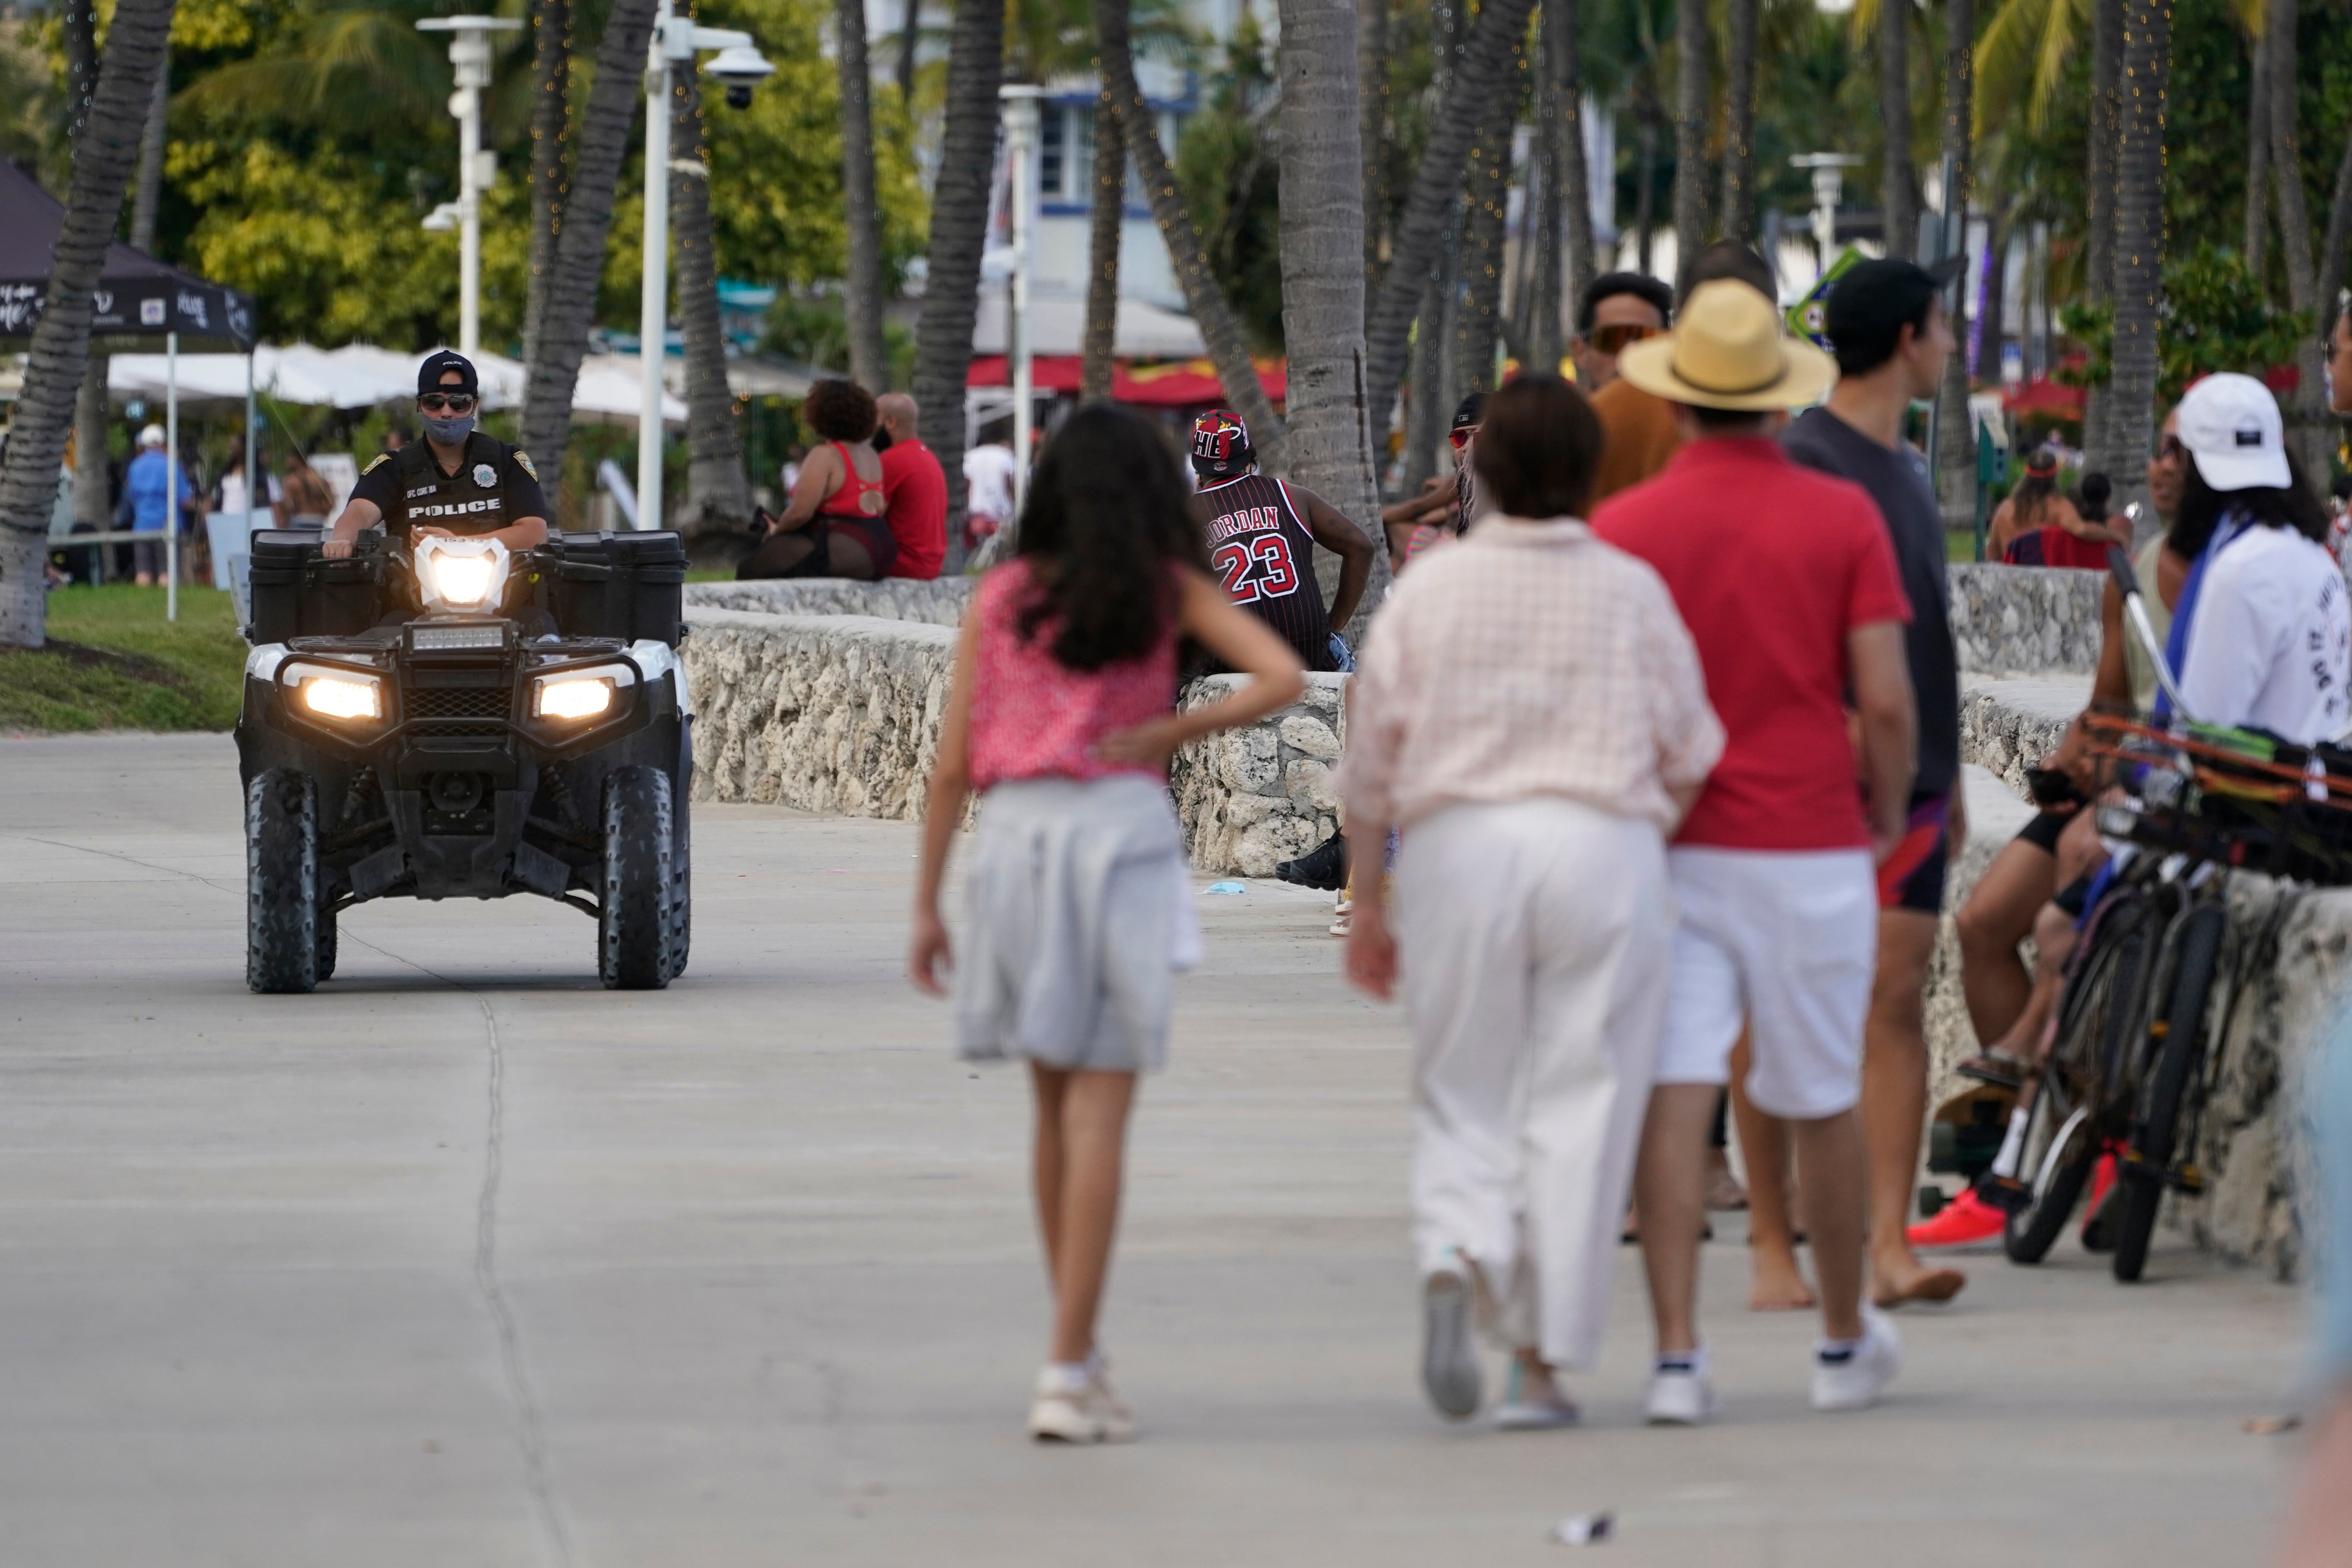 A police officer on an ATV patrols in Miami Beach, Florida’s famed South Beach